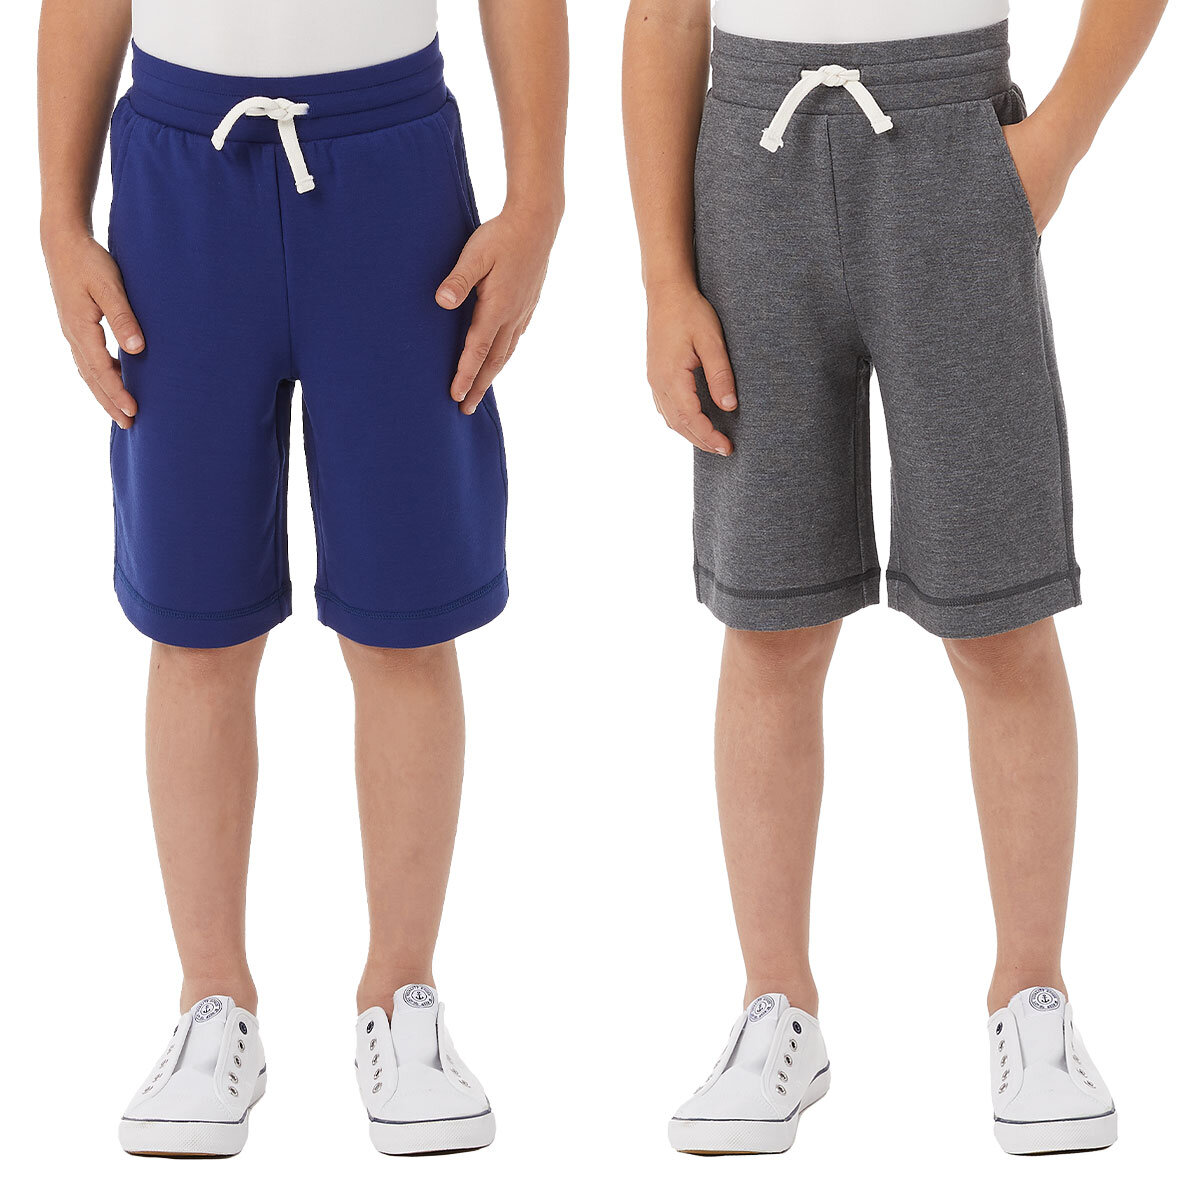 Image of shorts in both colours